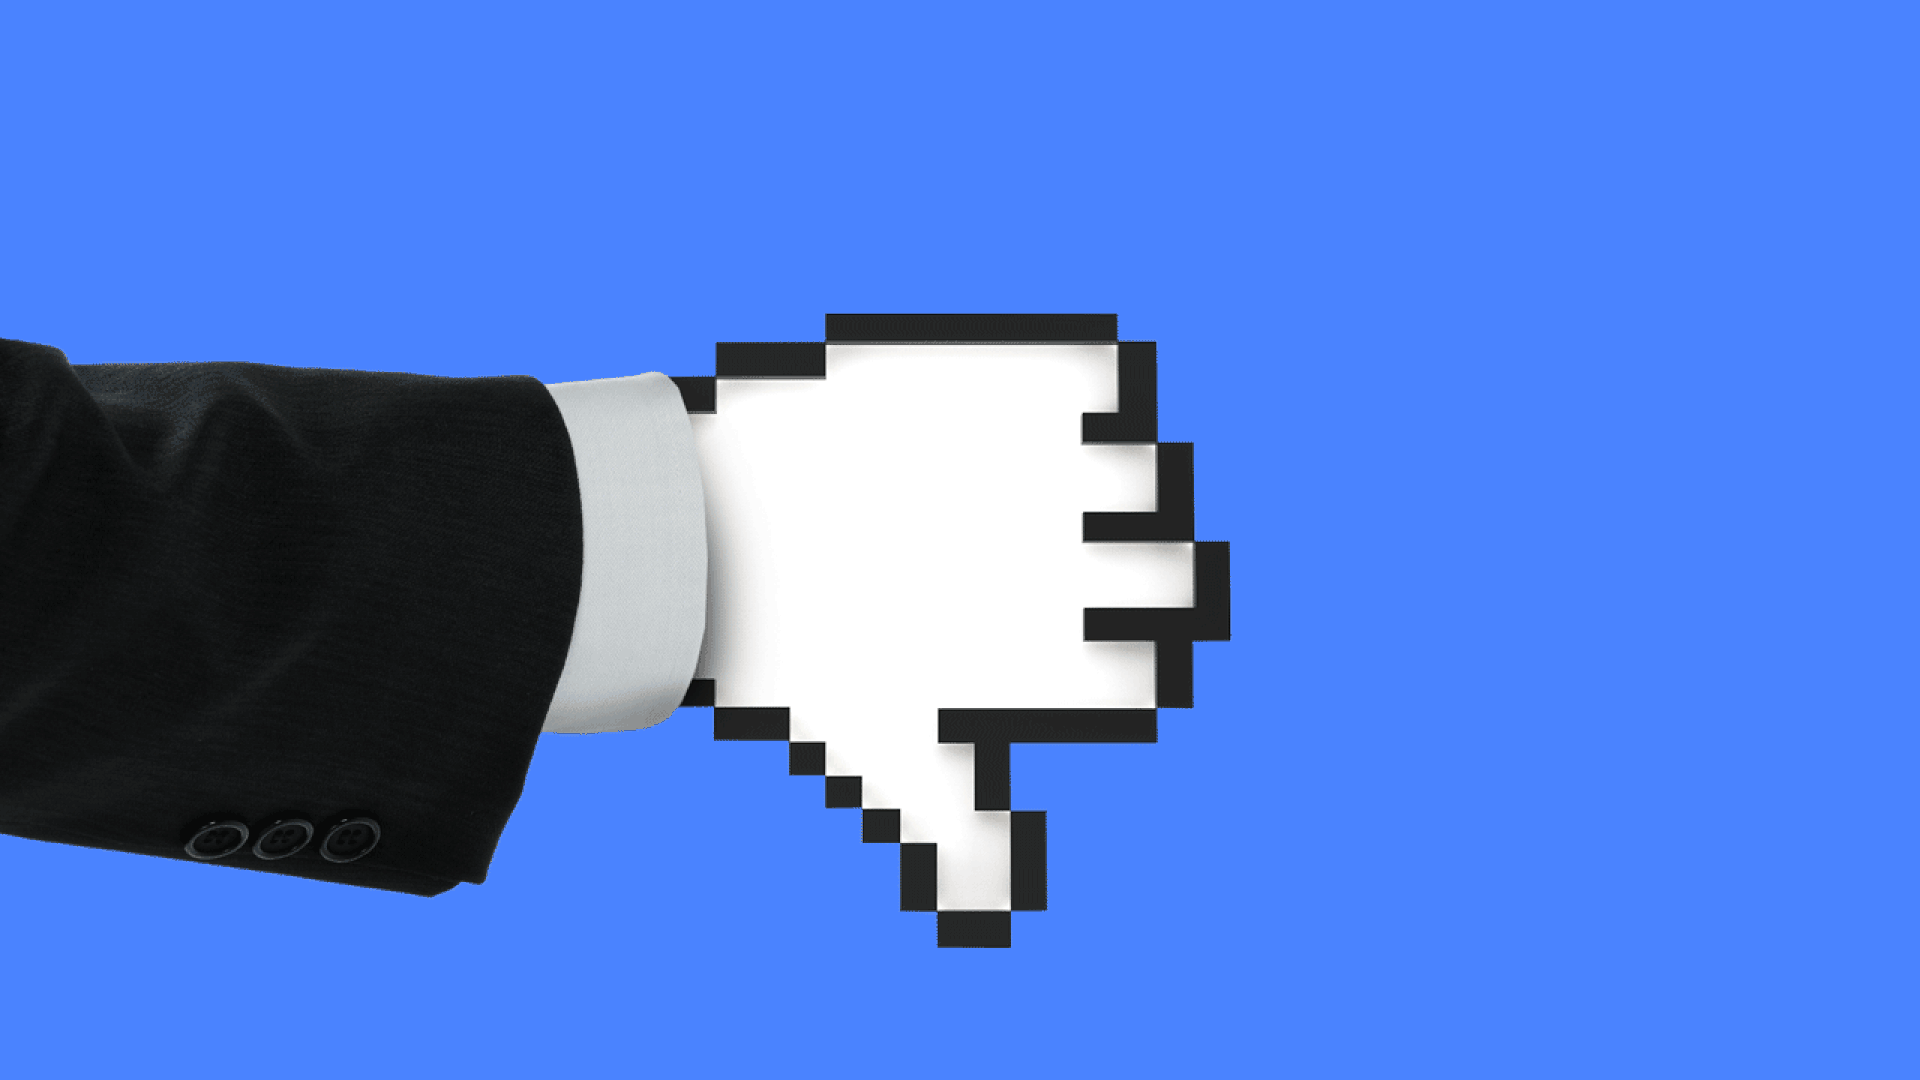 Animated illustration of a suited arm with a digital cursor thumbs up changing to a thumbs down